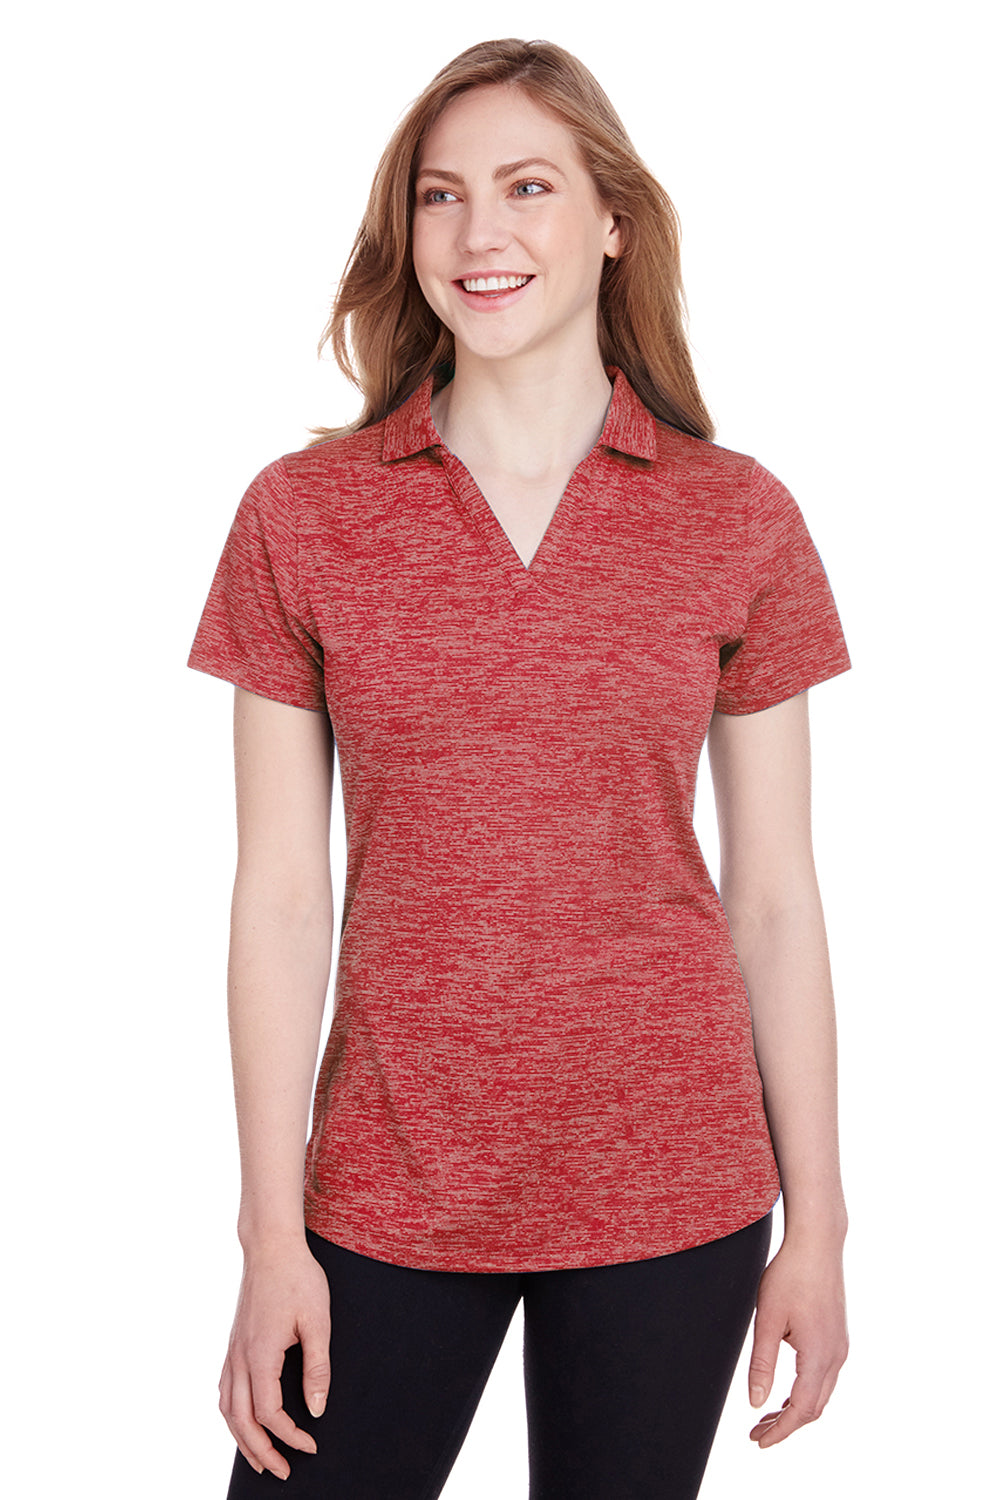 Puma 596802 Womens Icon Performance Moisture Wicking Short Sleeve Polo Shirt Red Front